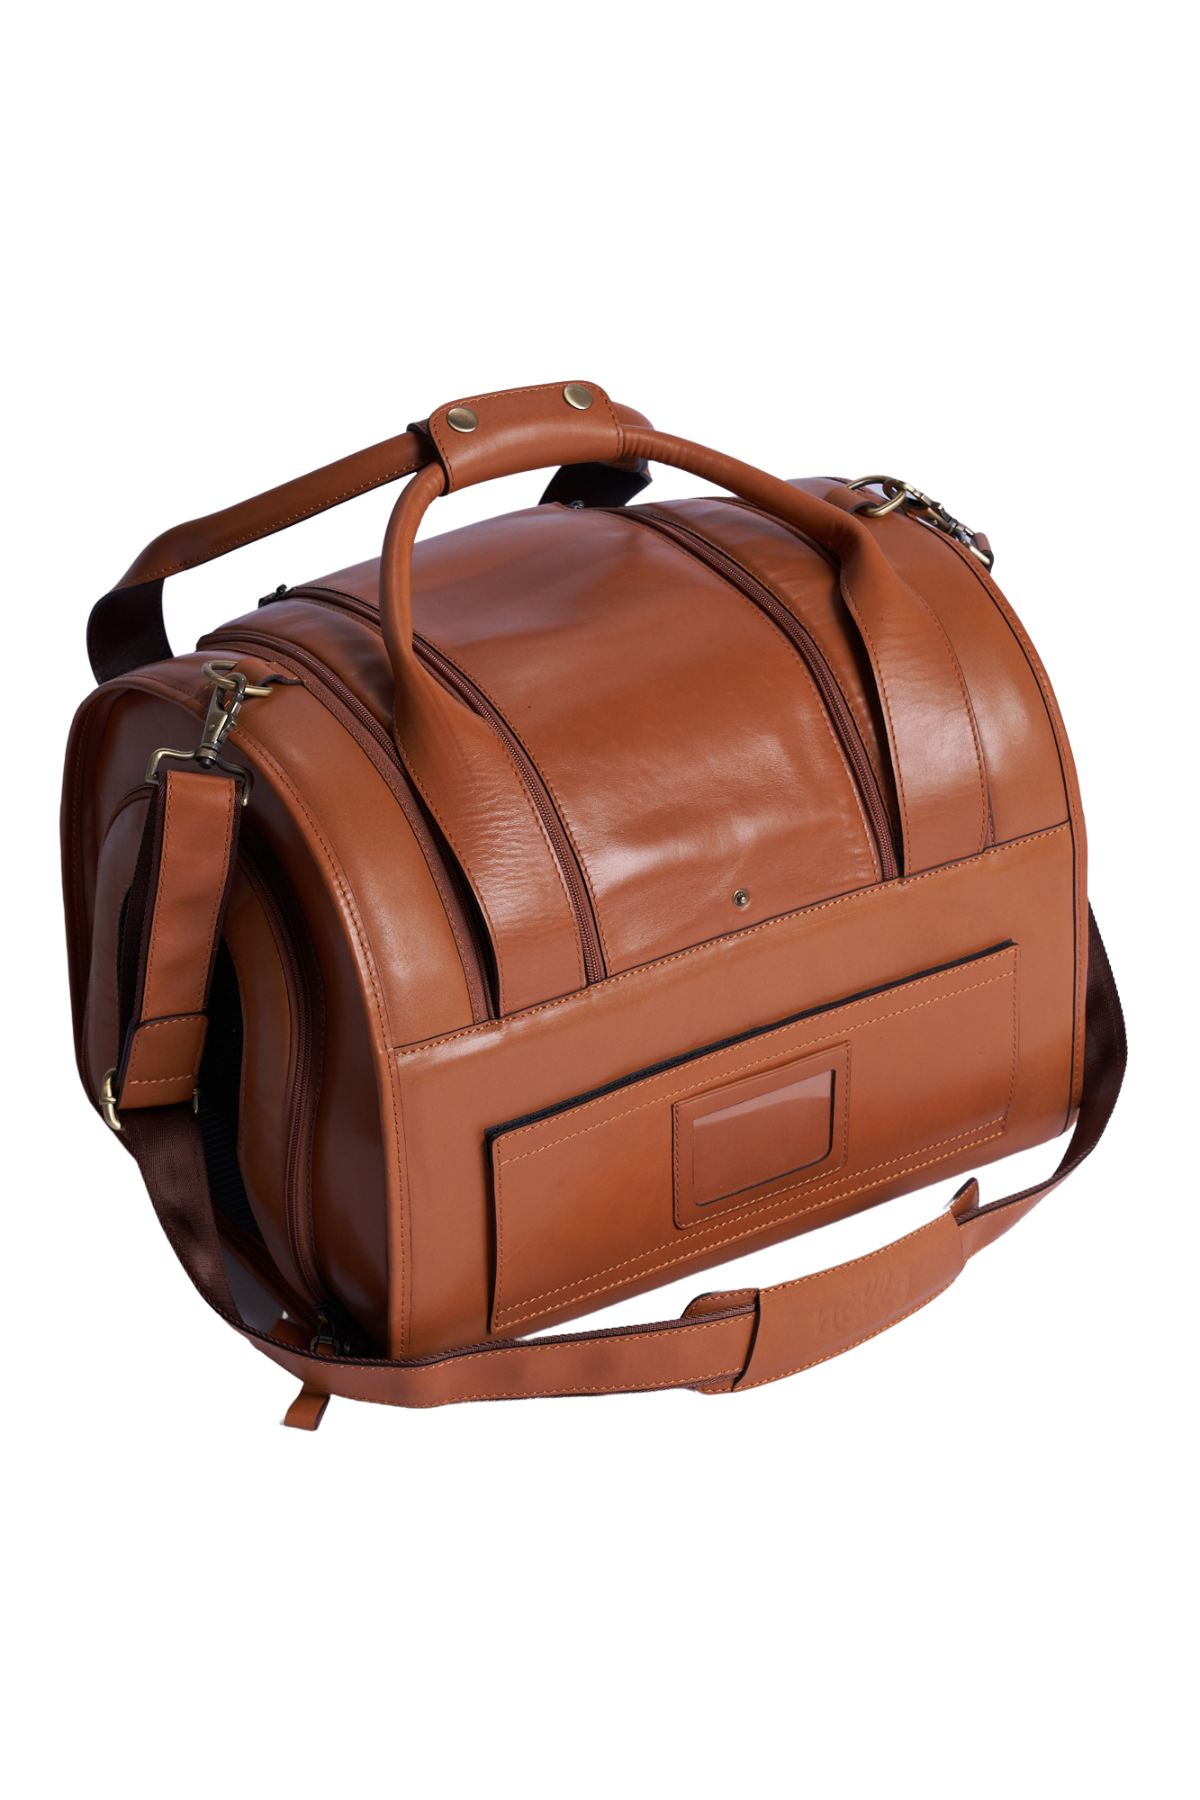 Leather Travel Pet Carrier/ Nest